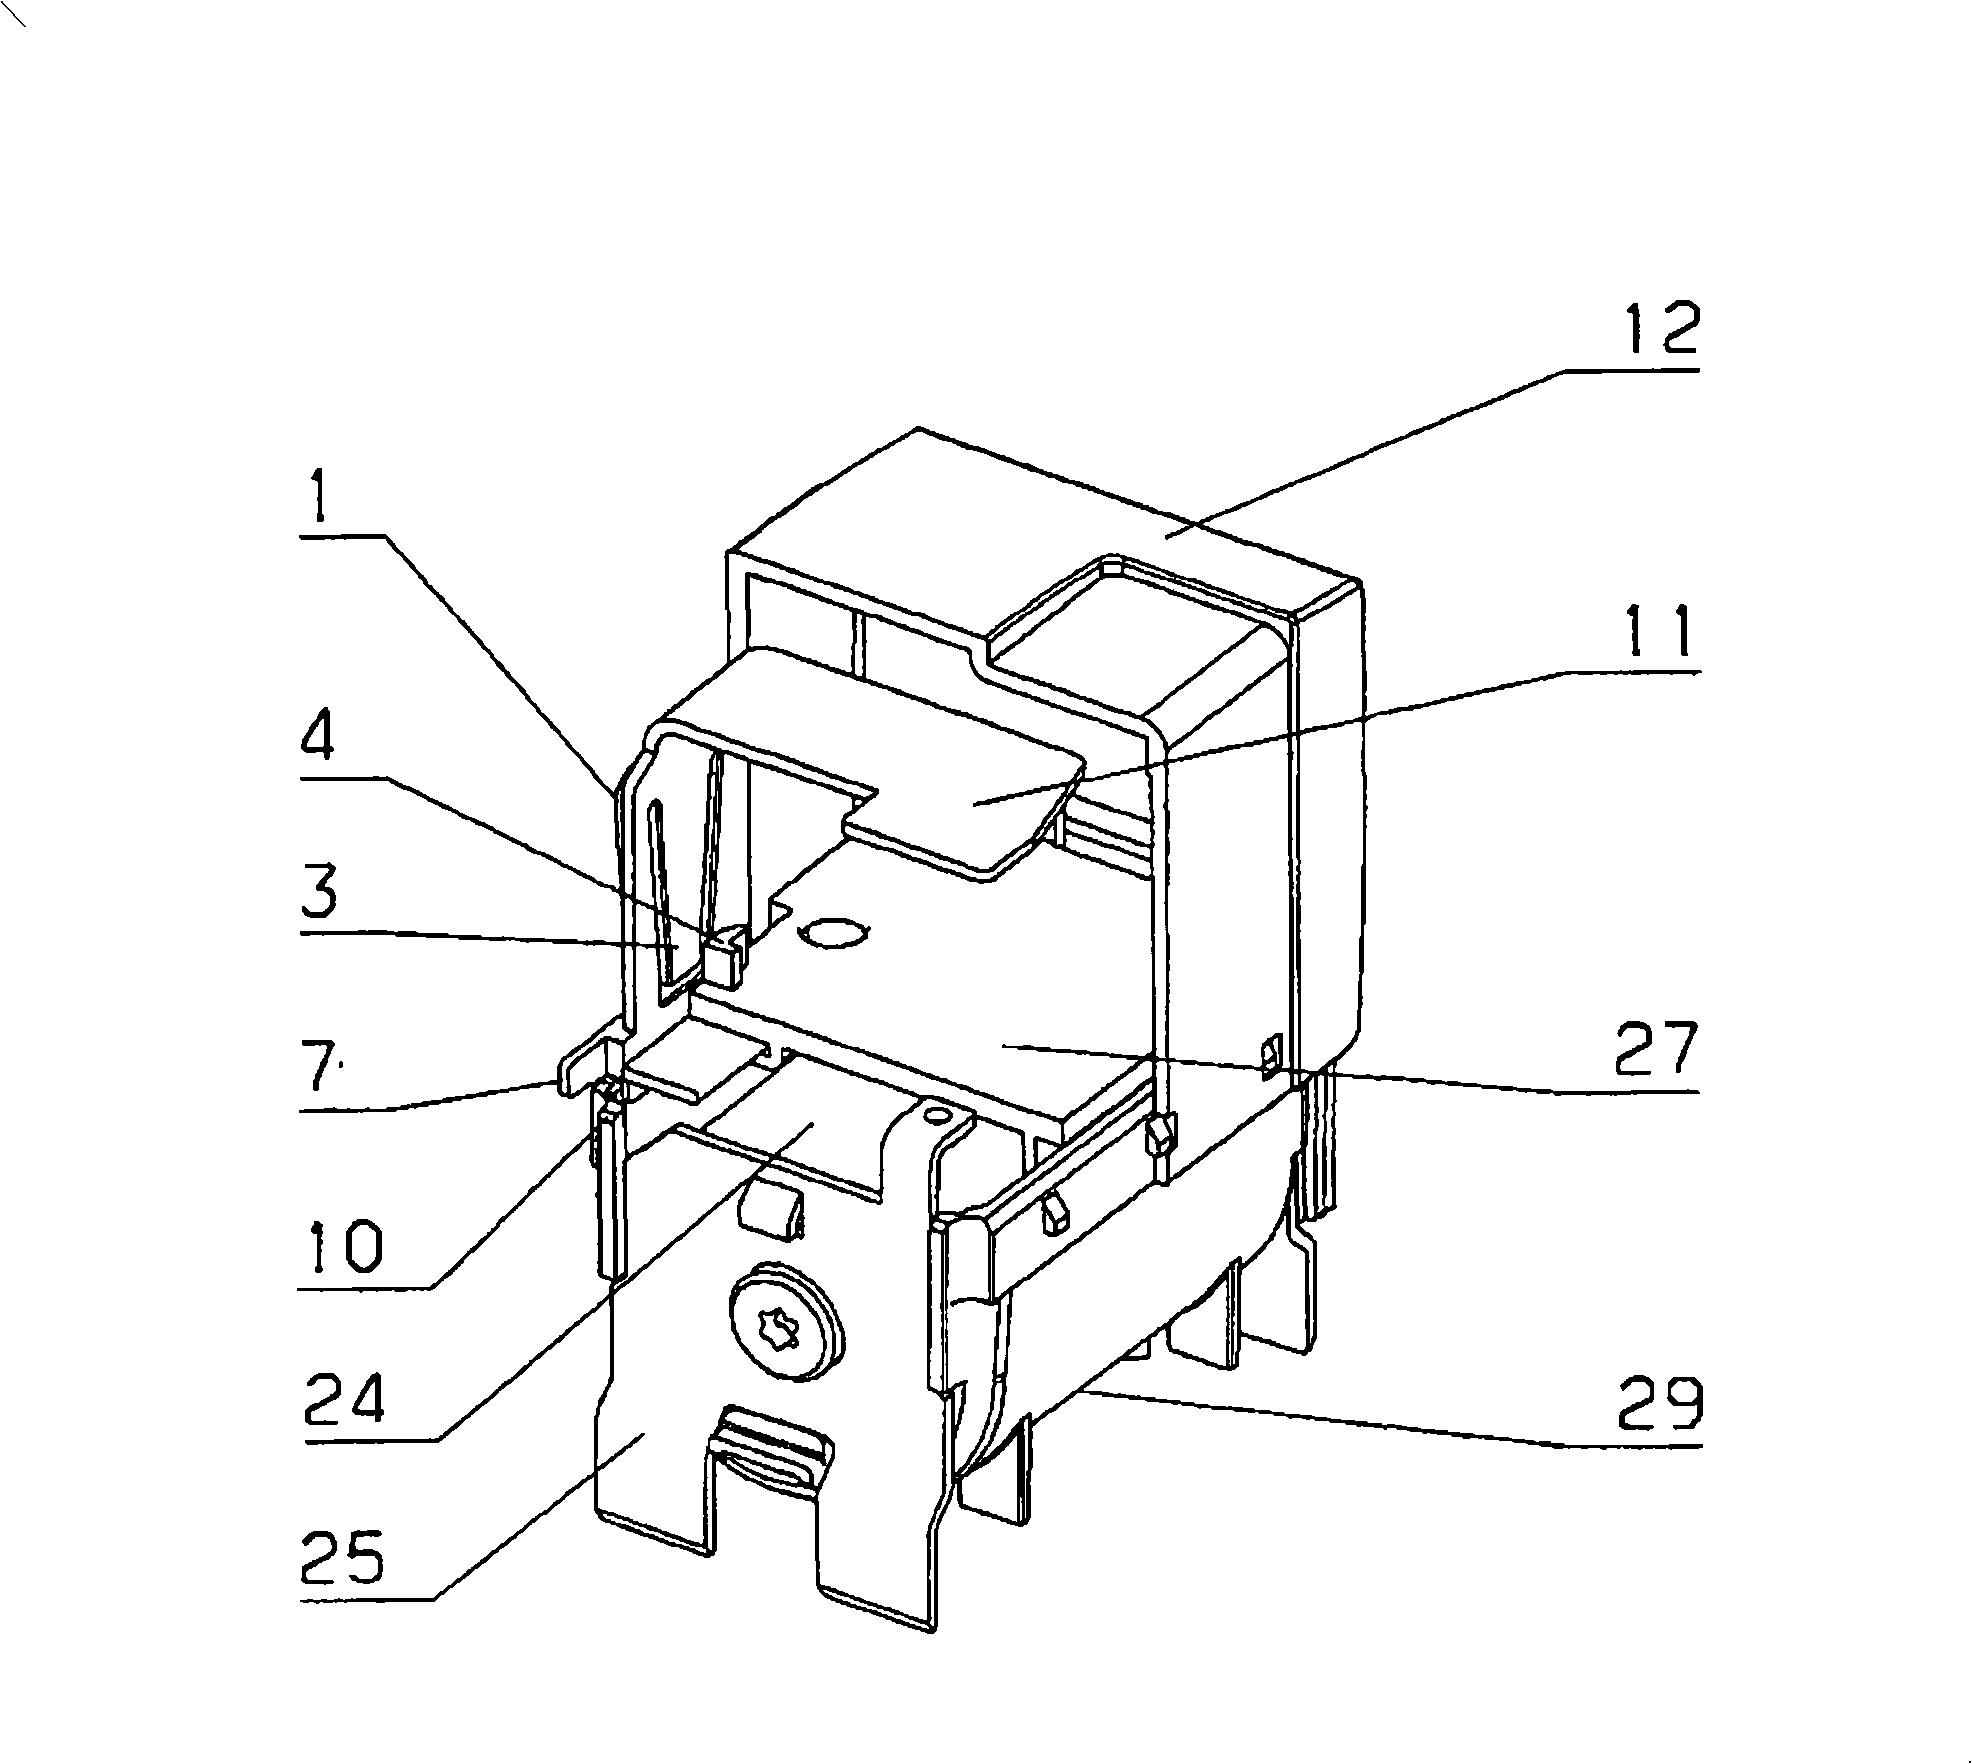 Pluggable surge arrester comprising one or several surge protection elements